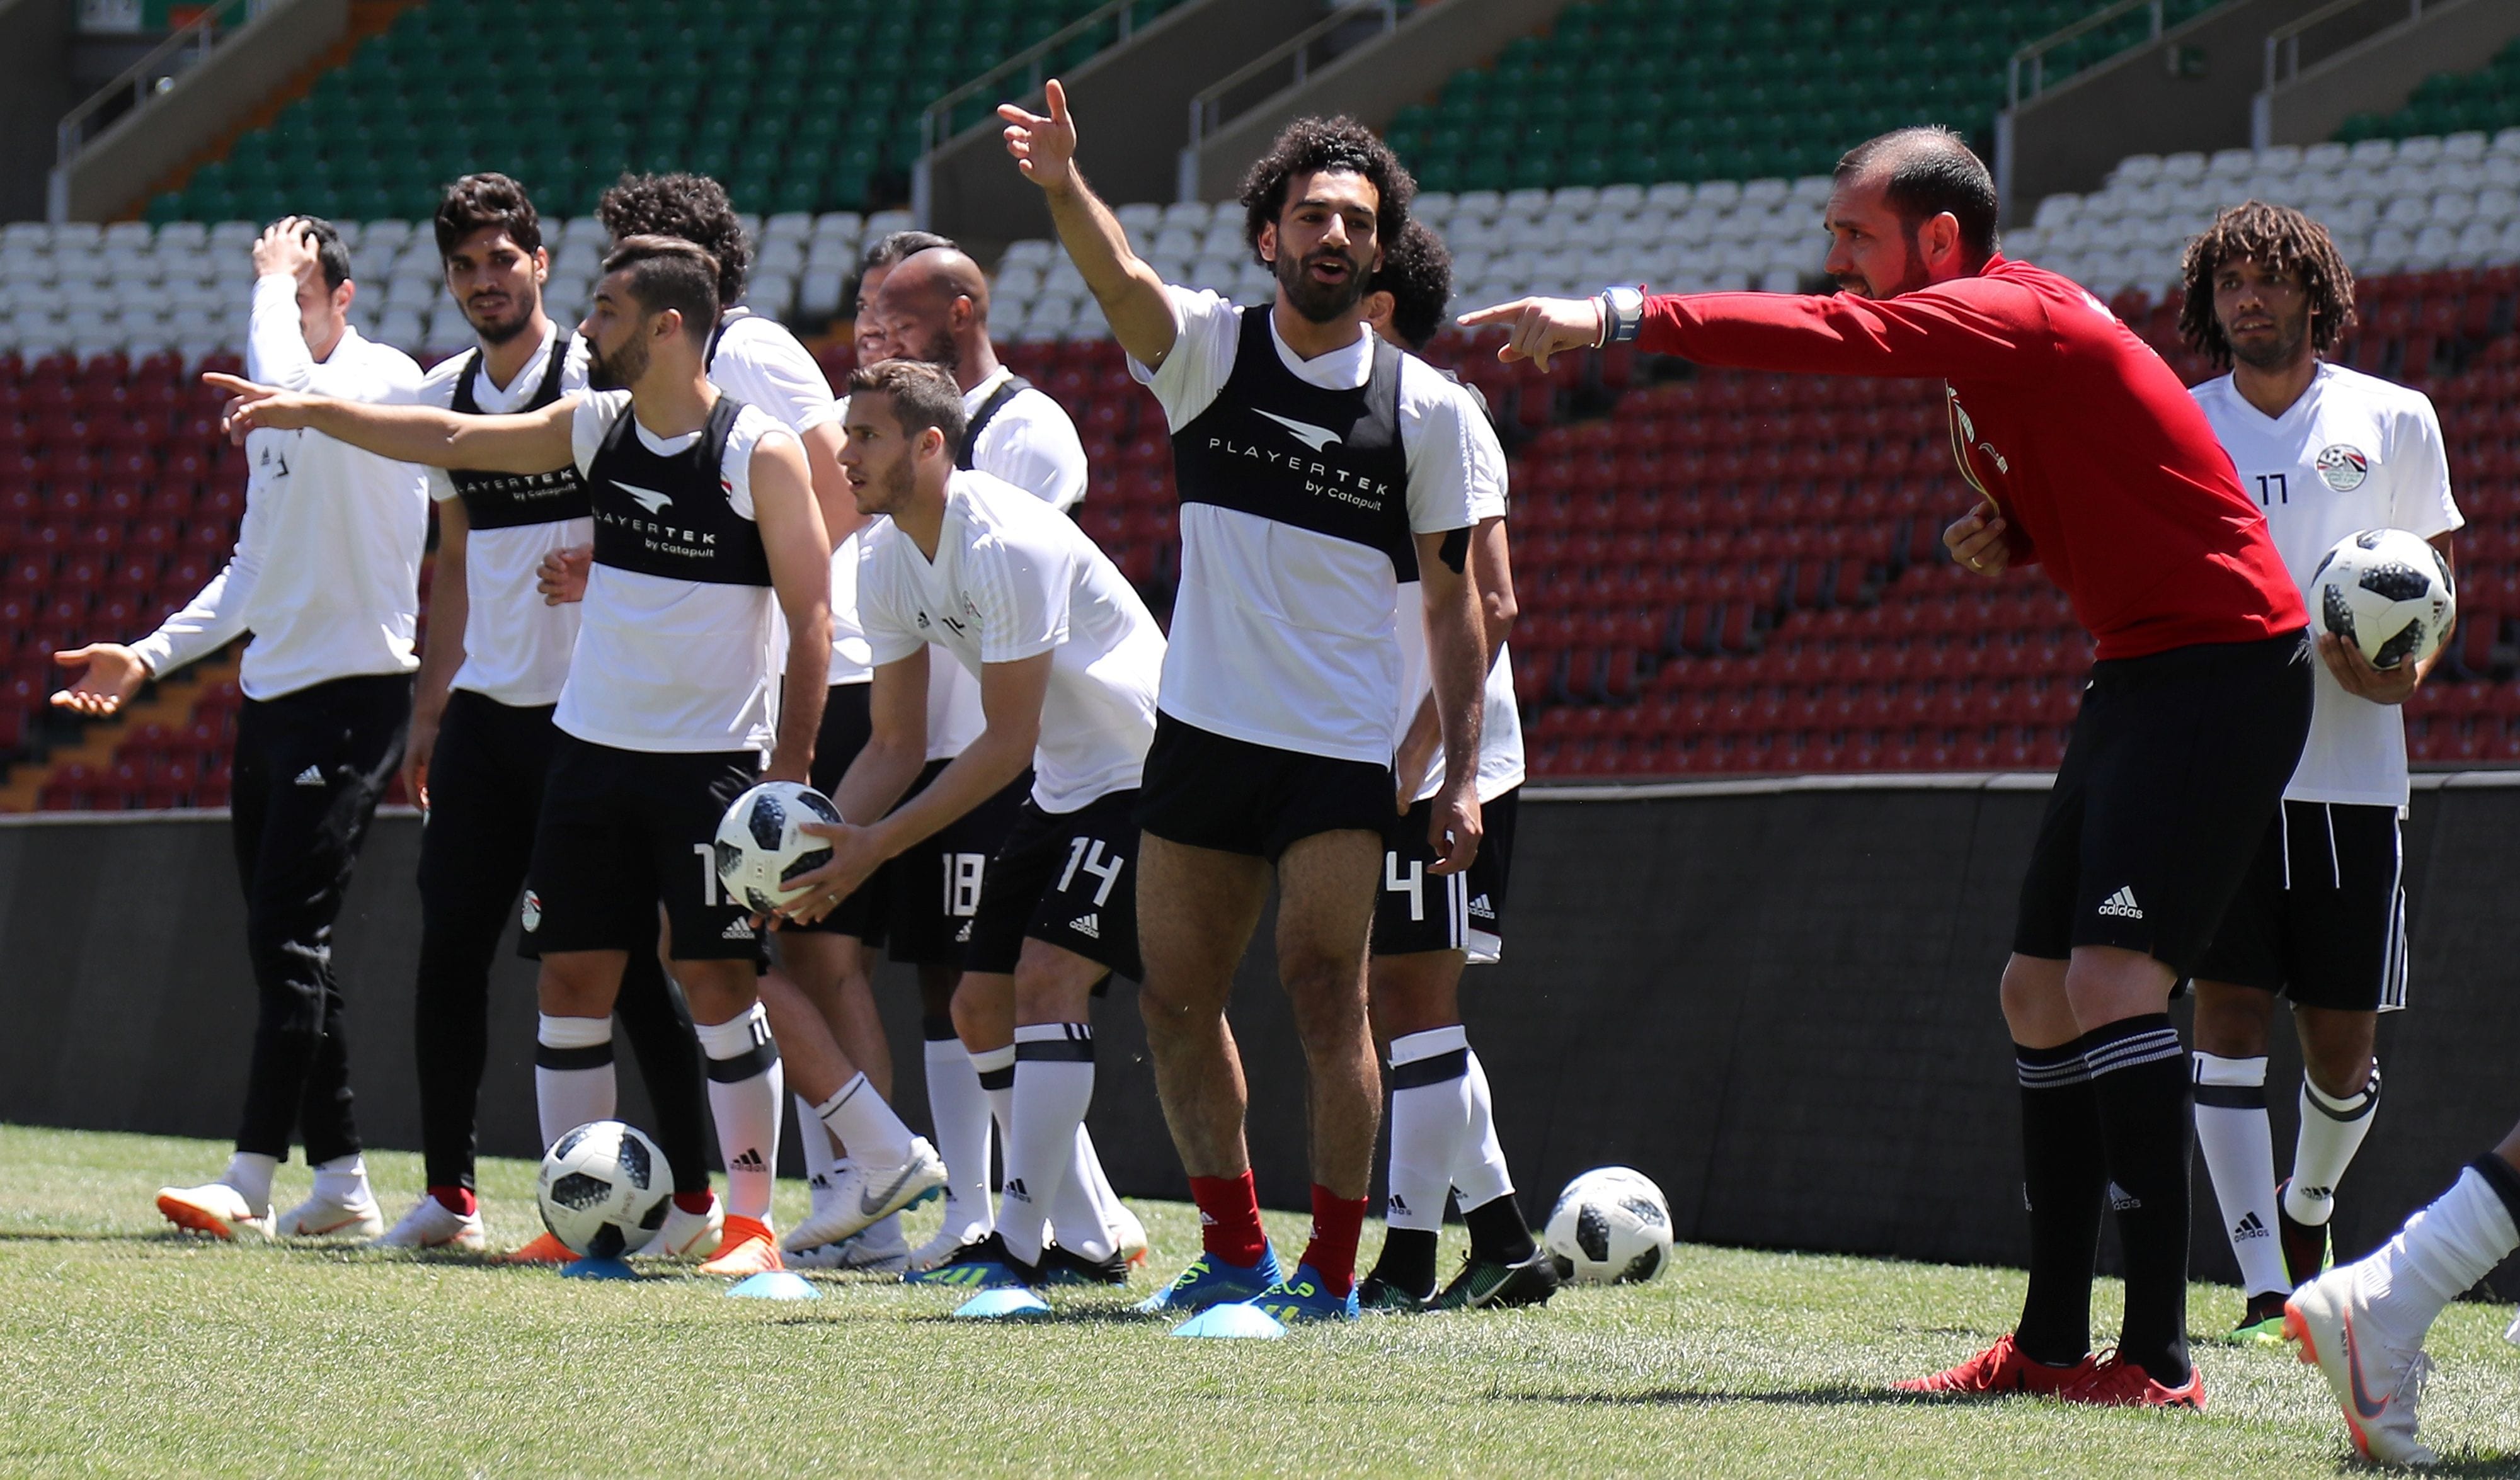 Egypt's forward Mohamed Salah (R) takes part in a training at the Akhmat Arena stadium in Grozny on June 13, 2018, ahead of the Russia 2018 World Cup football tournament. / AFP PHOTO / KARIM JAAFAR